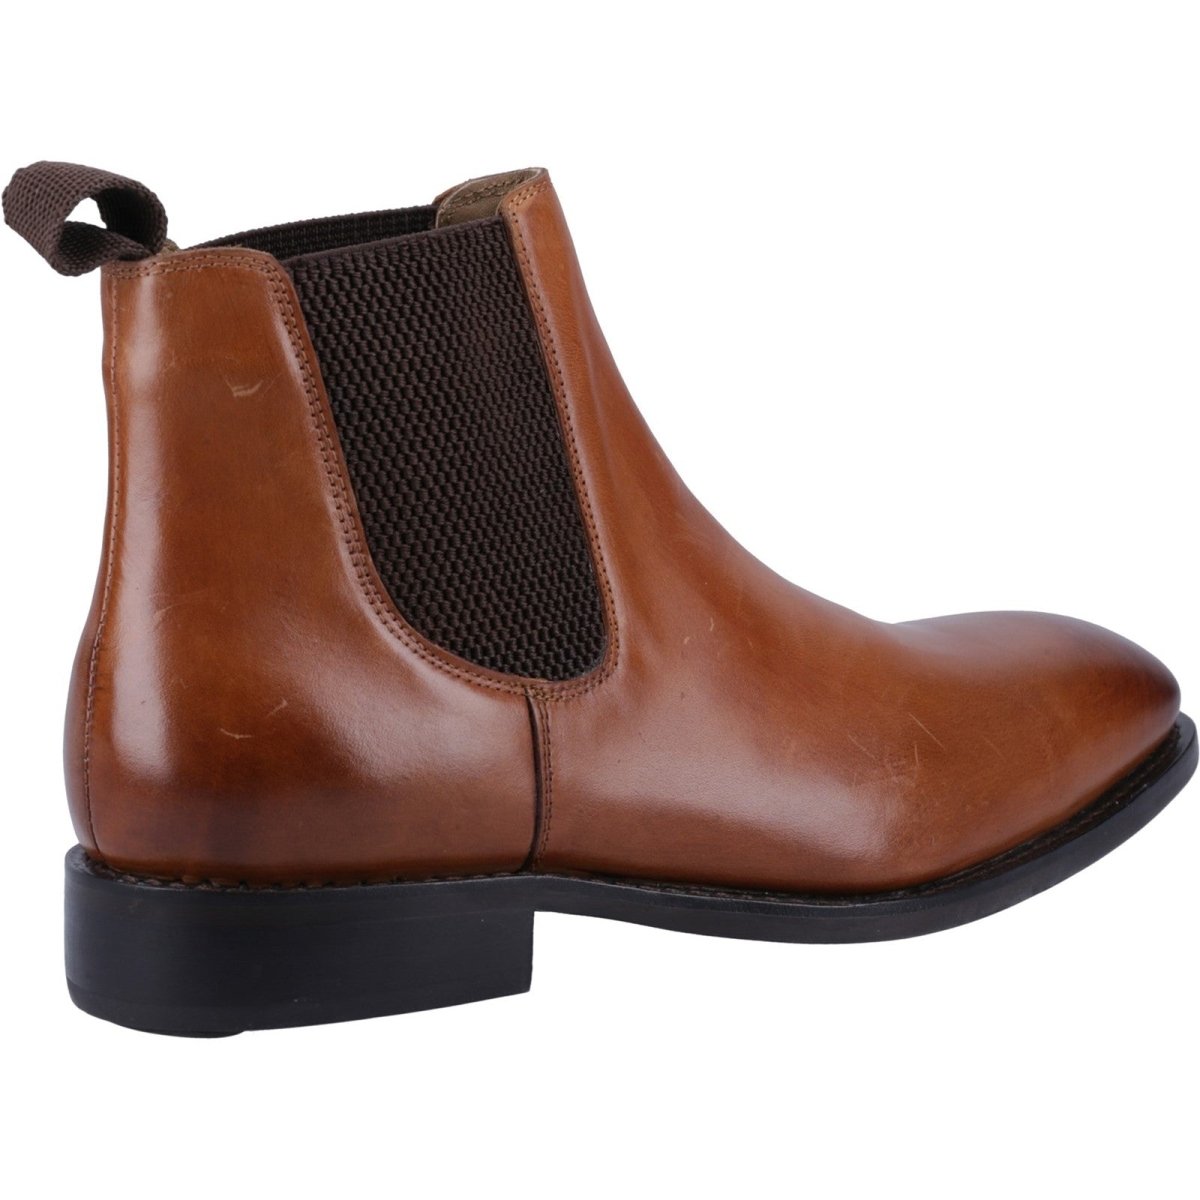 Cotswold Hawkesbury Boots - Shuzes